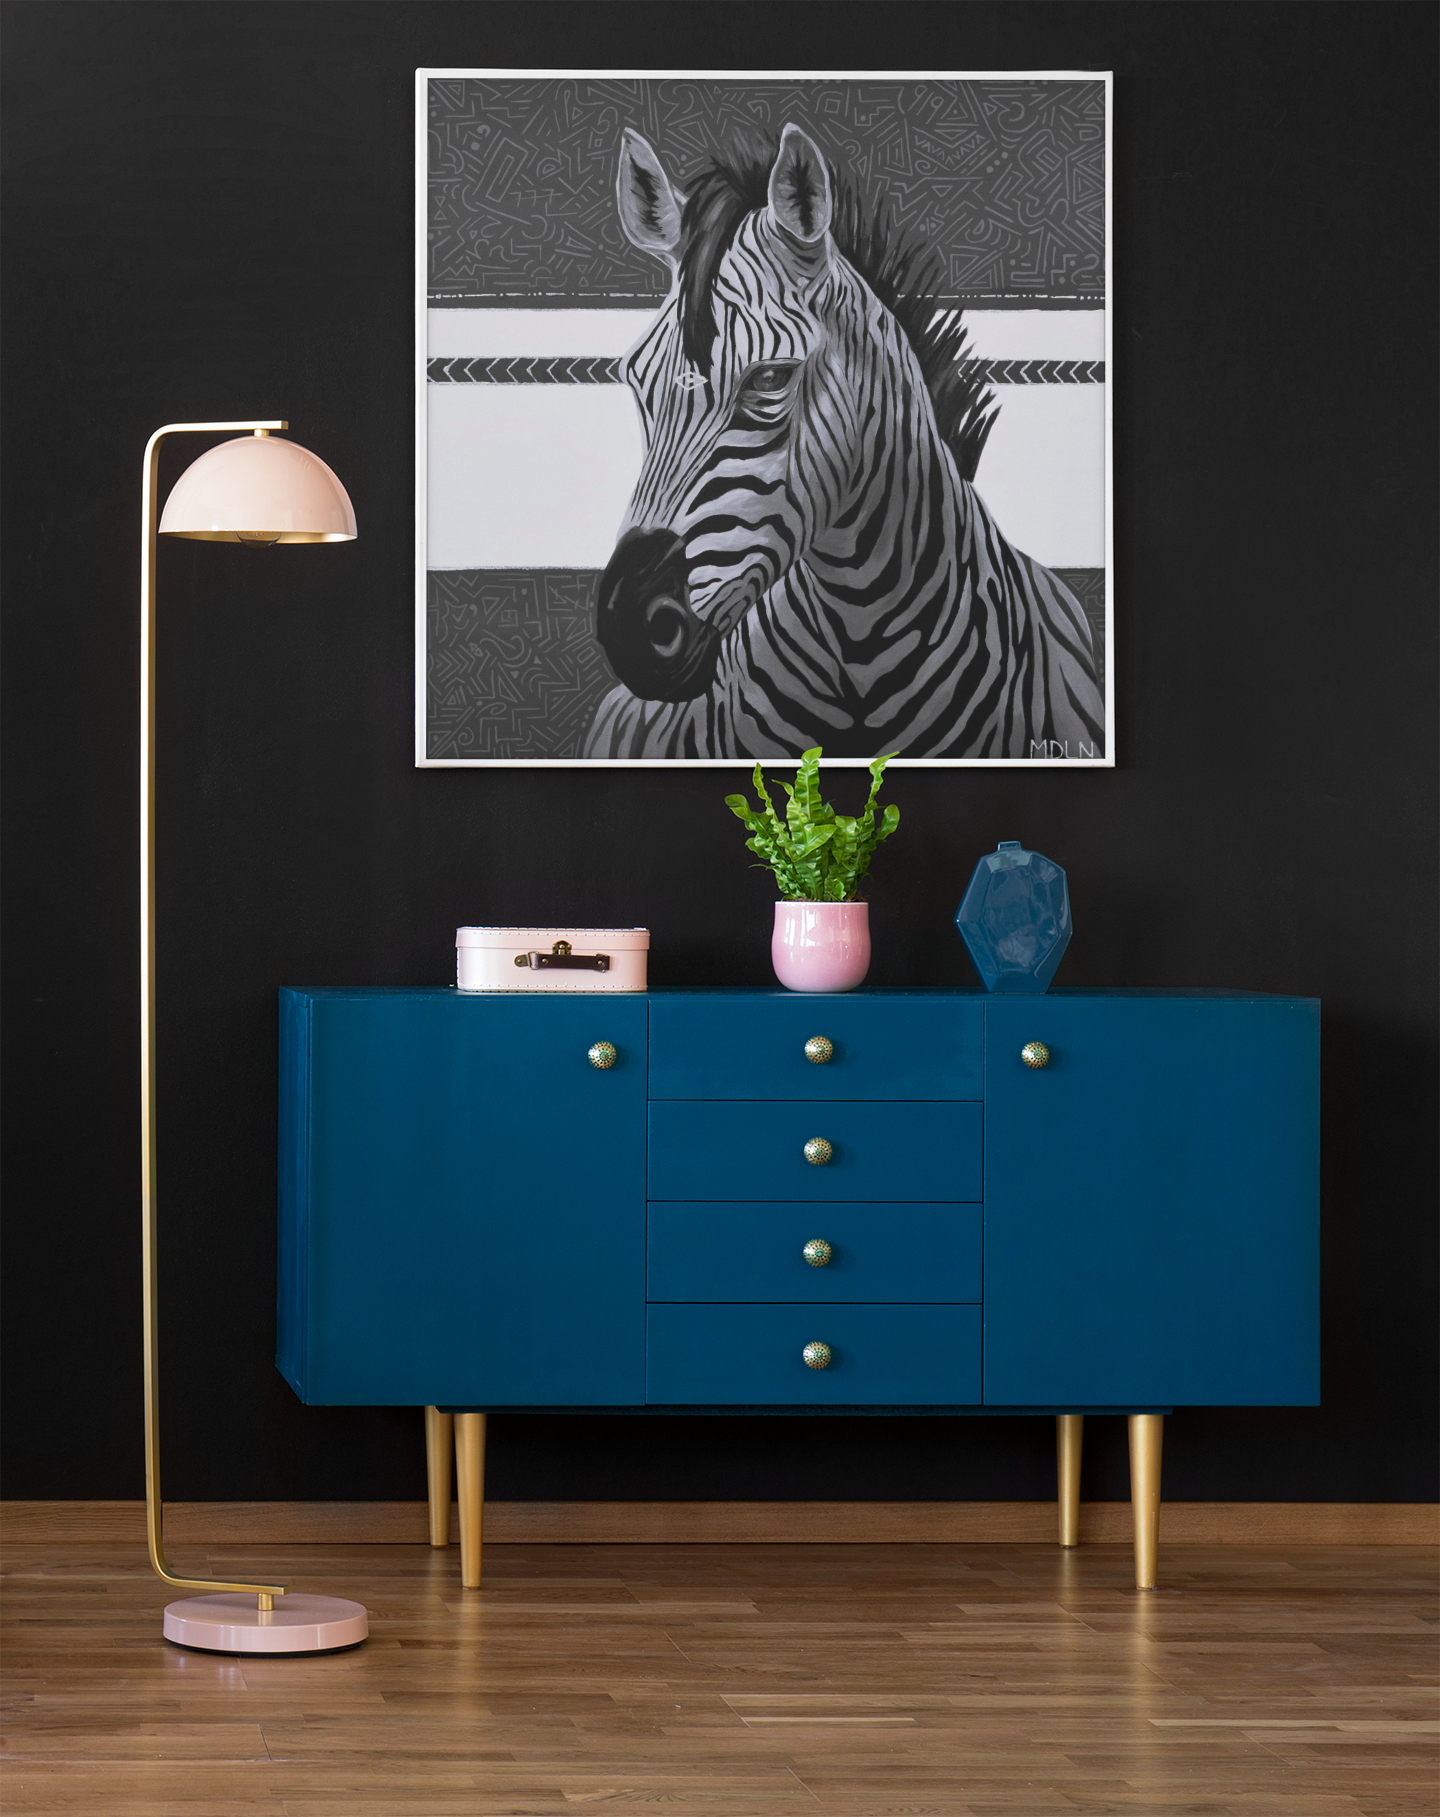 A black and white  giclee art print of a majestic zebra painting with abstract background, zebra art hanging on a wall over a cabinet next to a lamp